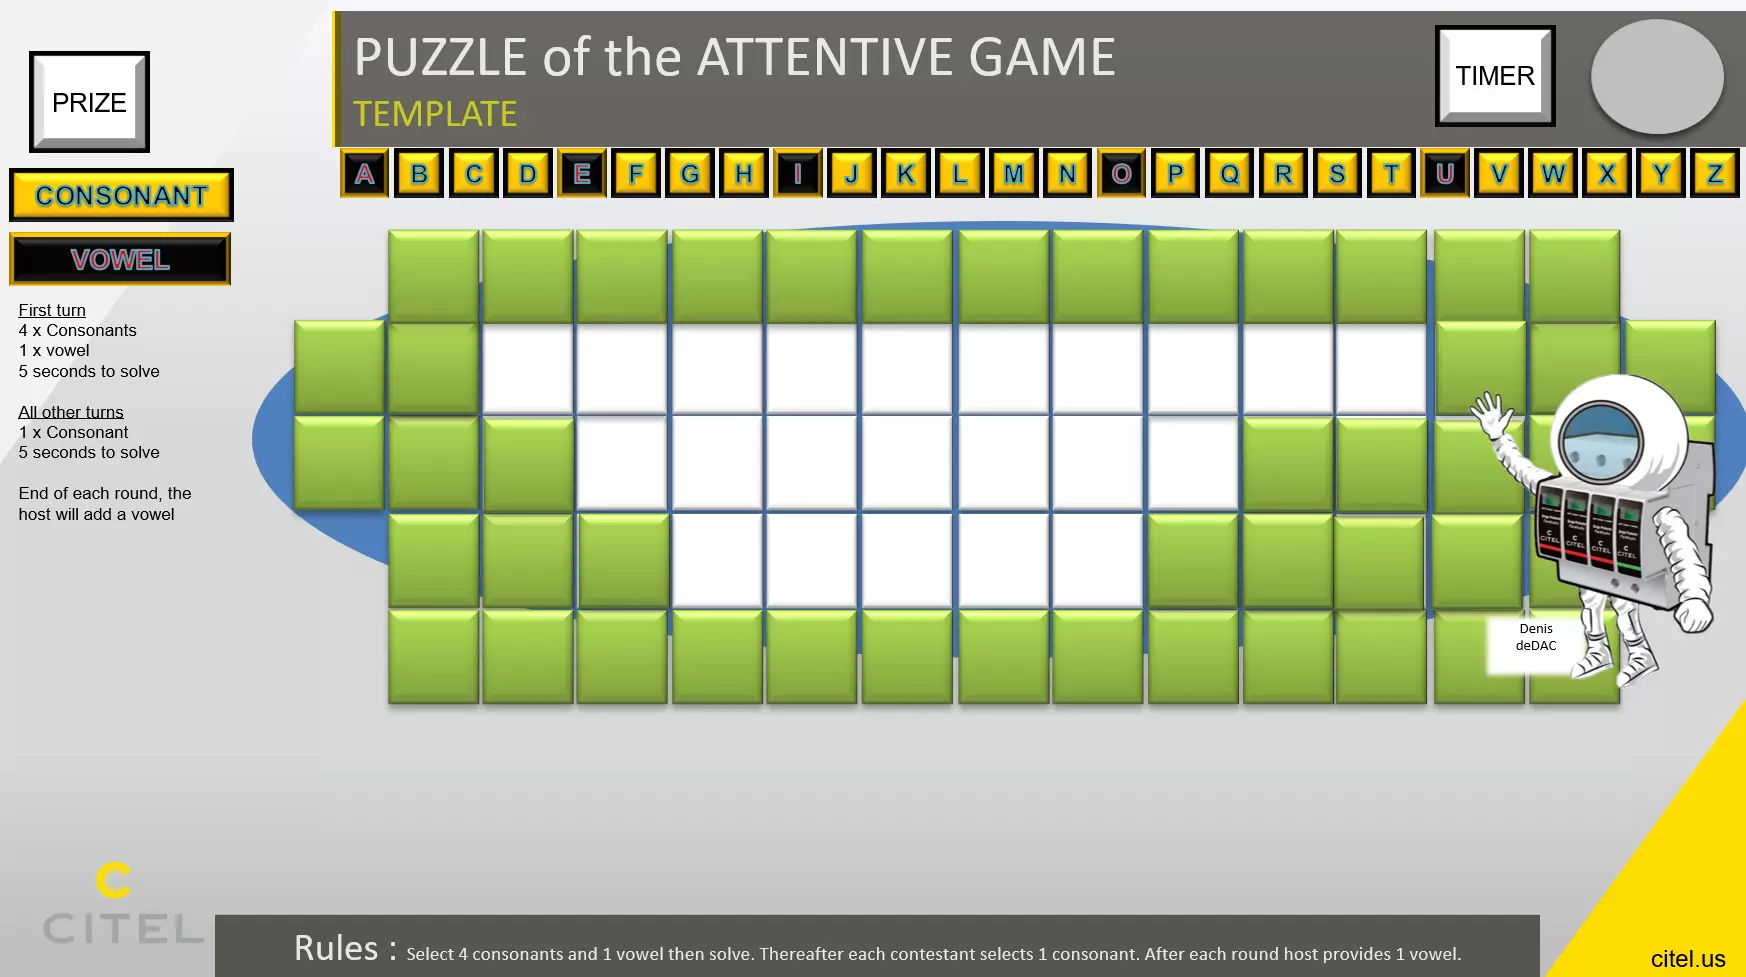 Contest Puzzle of the Attentive